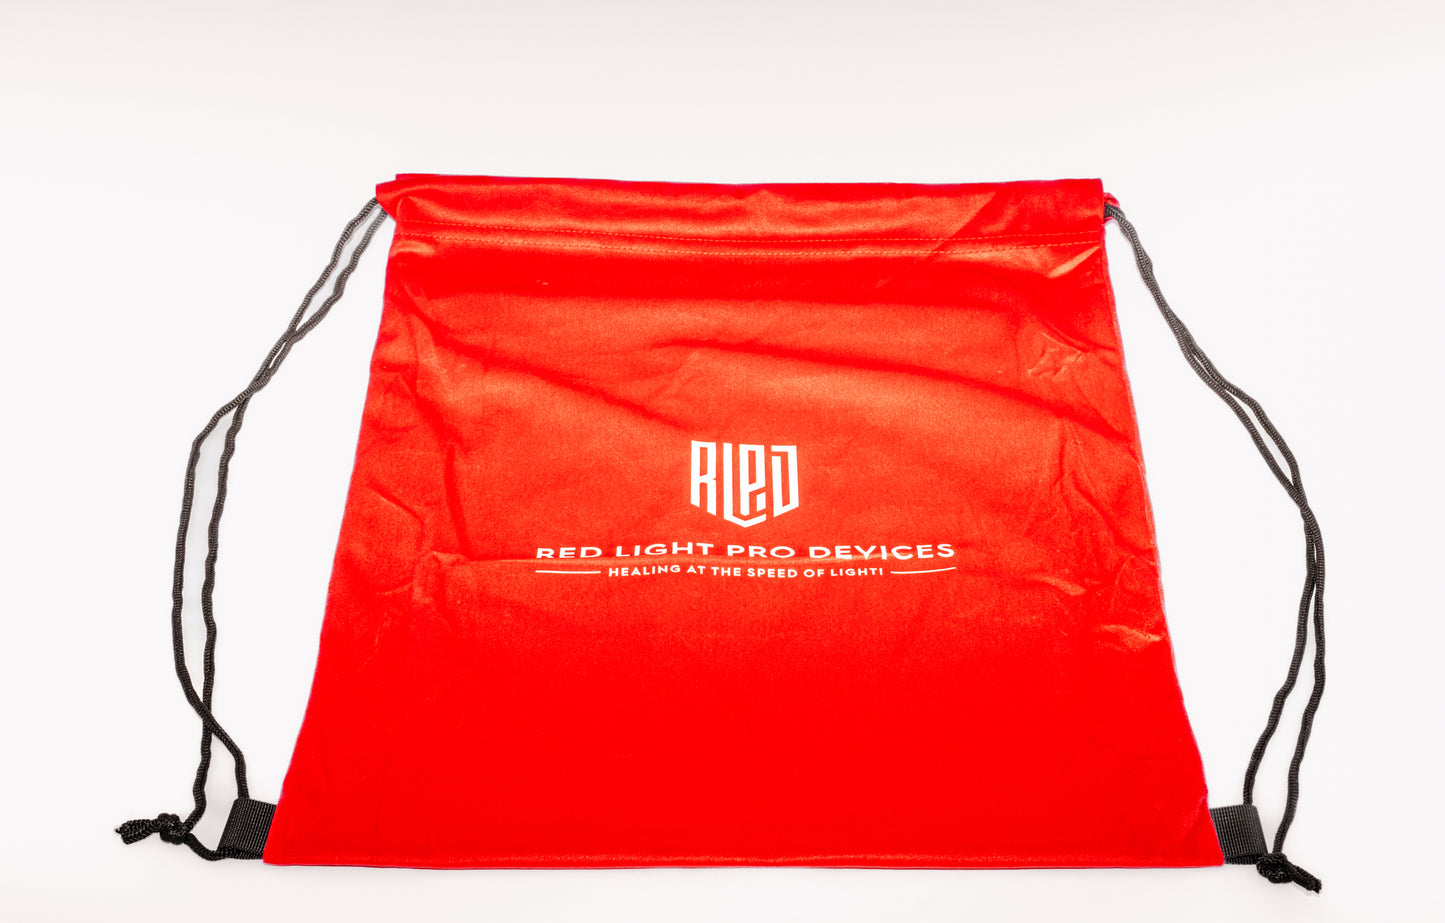 Red Light Small Pad 11" X 7" With 540 Powerful LED's